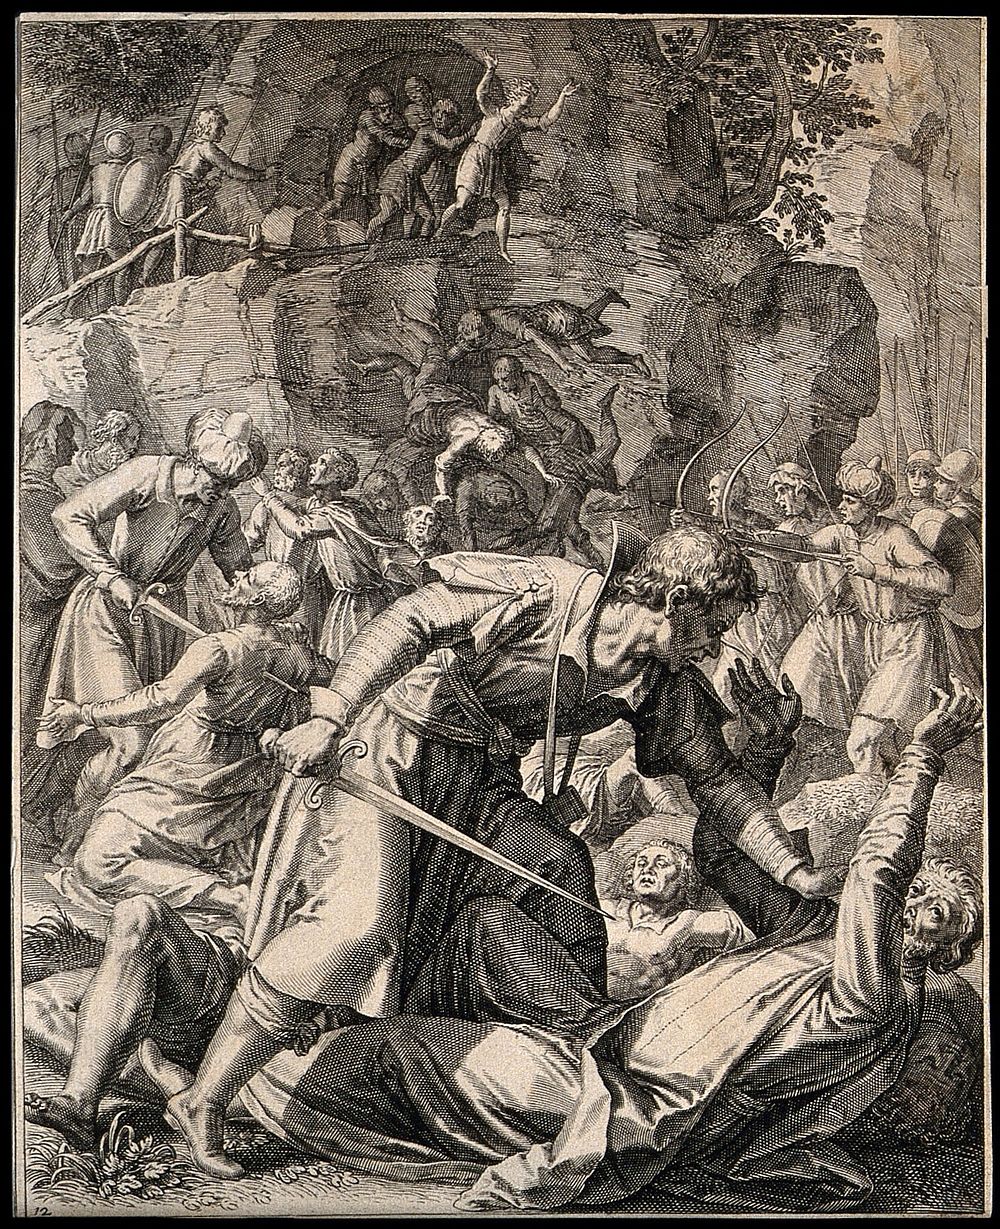 A massacre by a group of soldiers. Engraving.